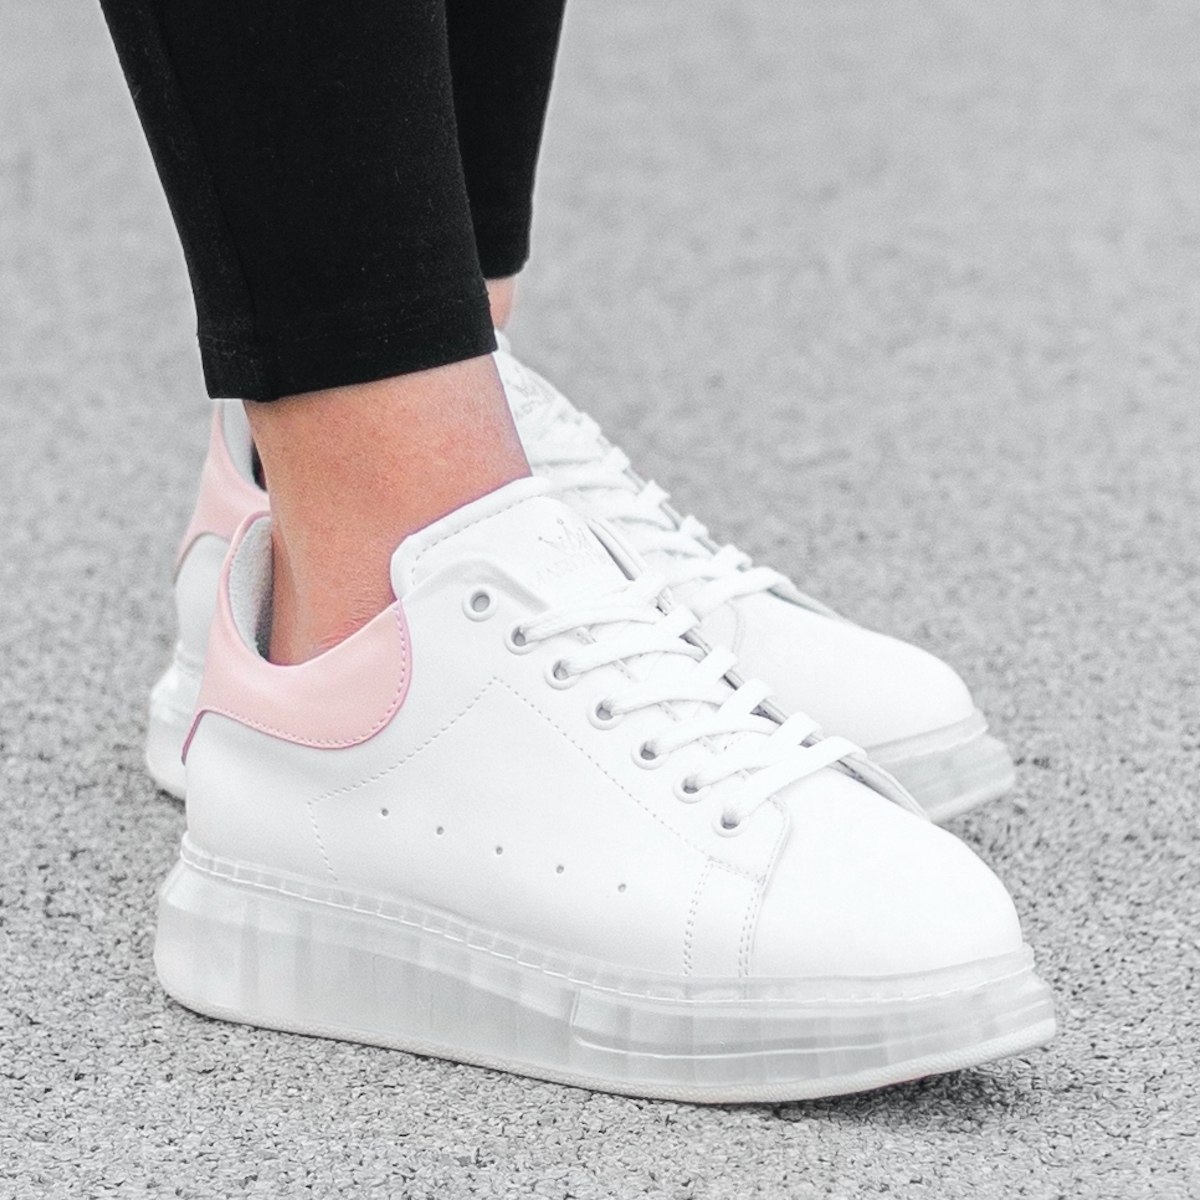 Women's O2 Transparent Hype Sole Sneakers In White-Pink